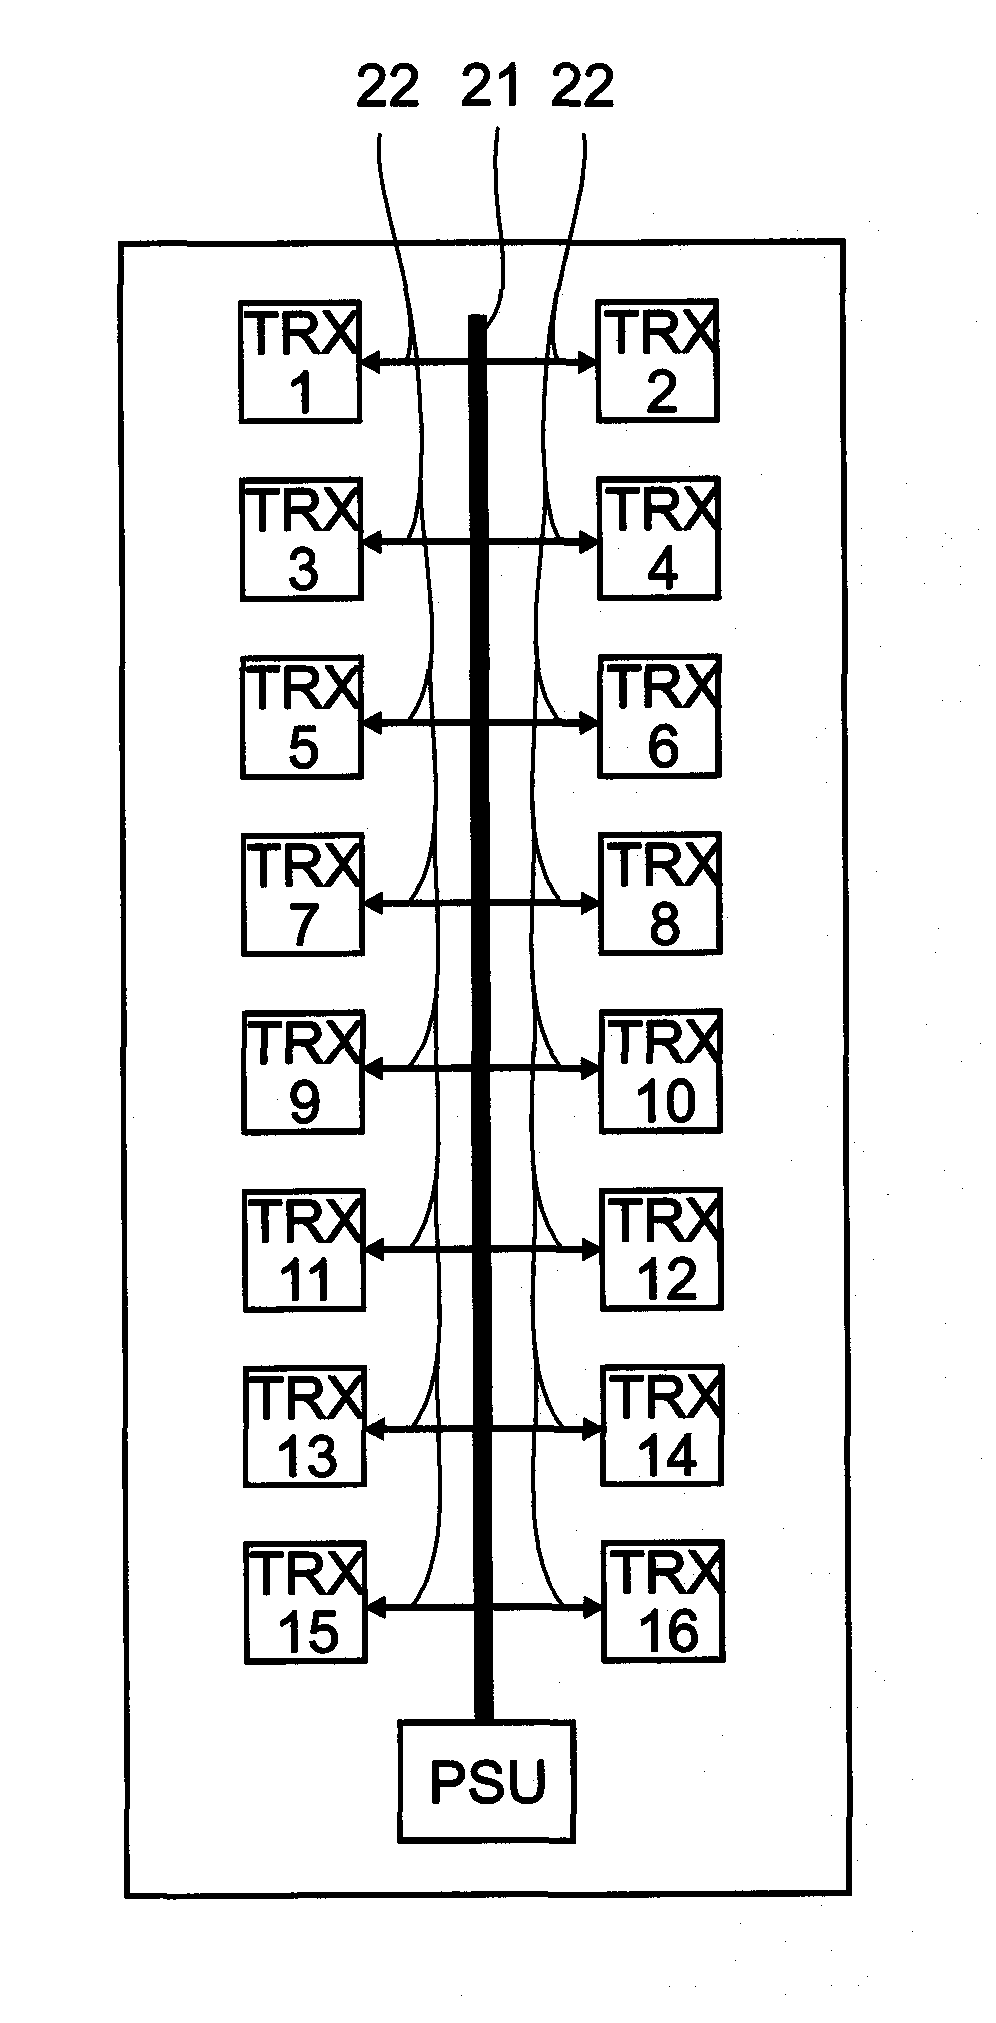 Bus bar power distribution for an antenna embedded radio system